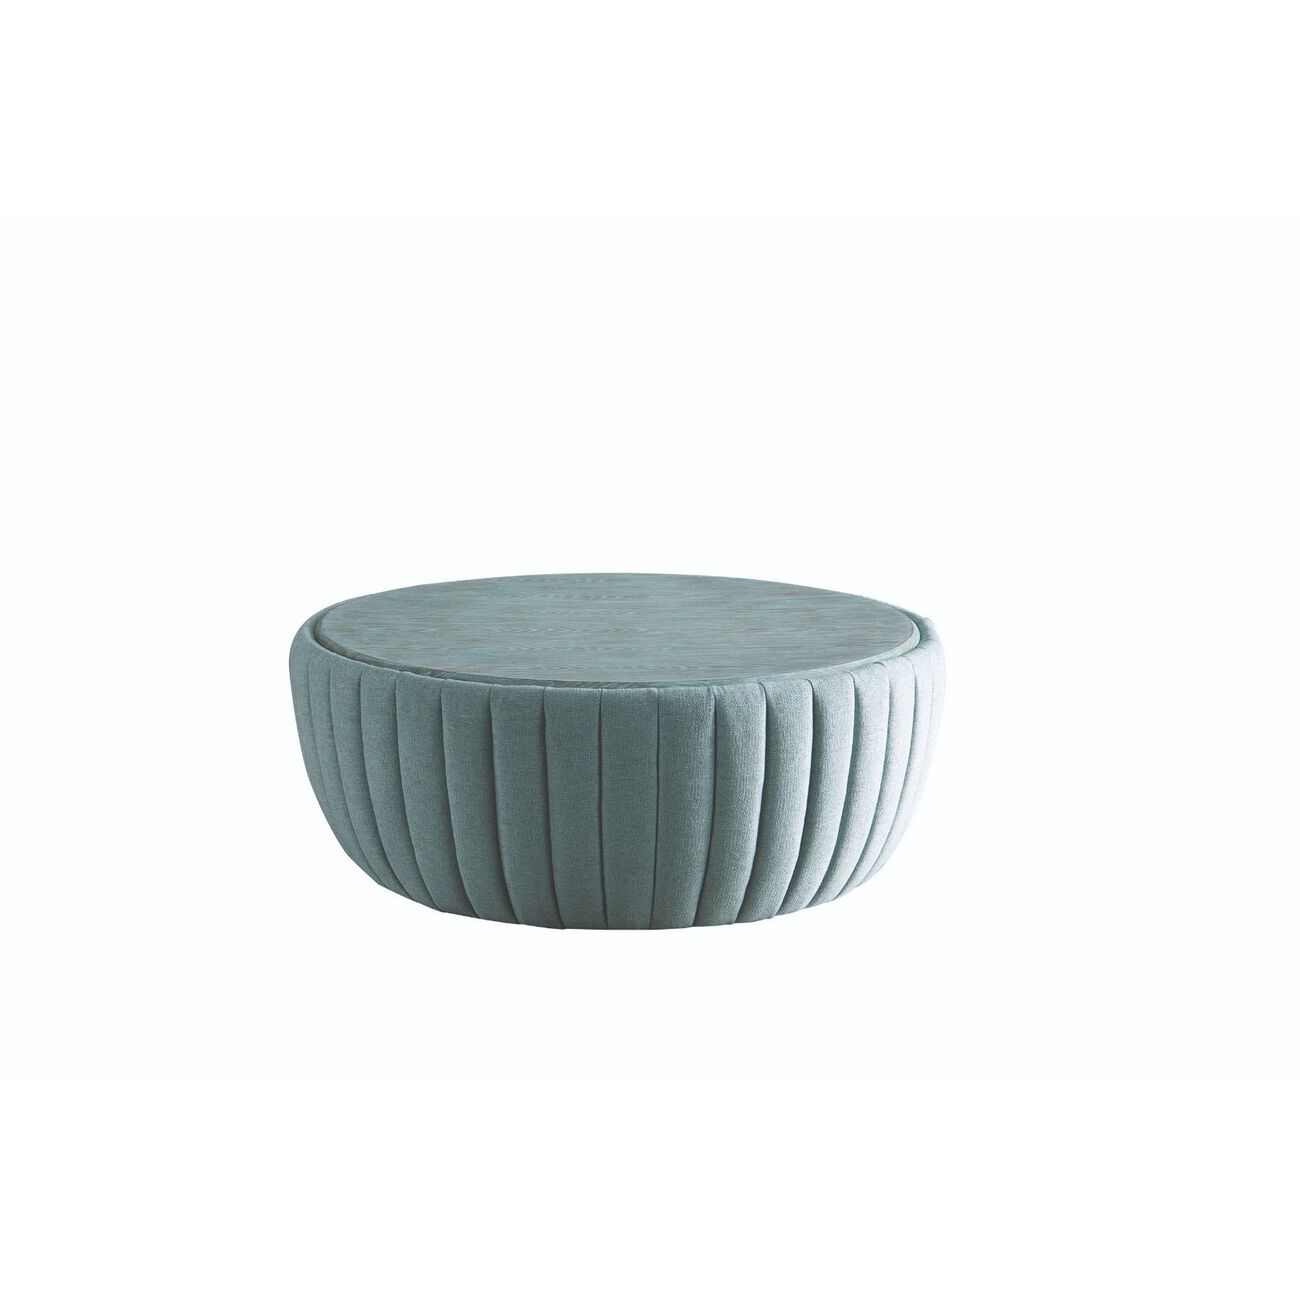 Round Shaped Fabric Coffee Table with Vertical Tufted Channels, Blue